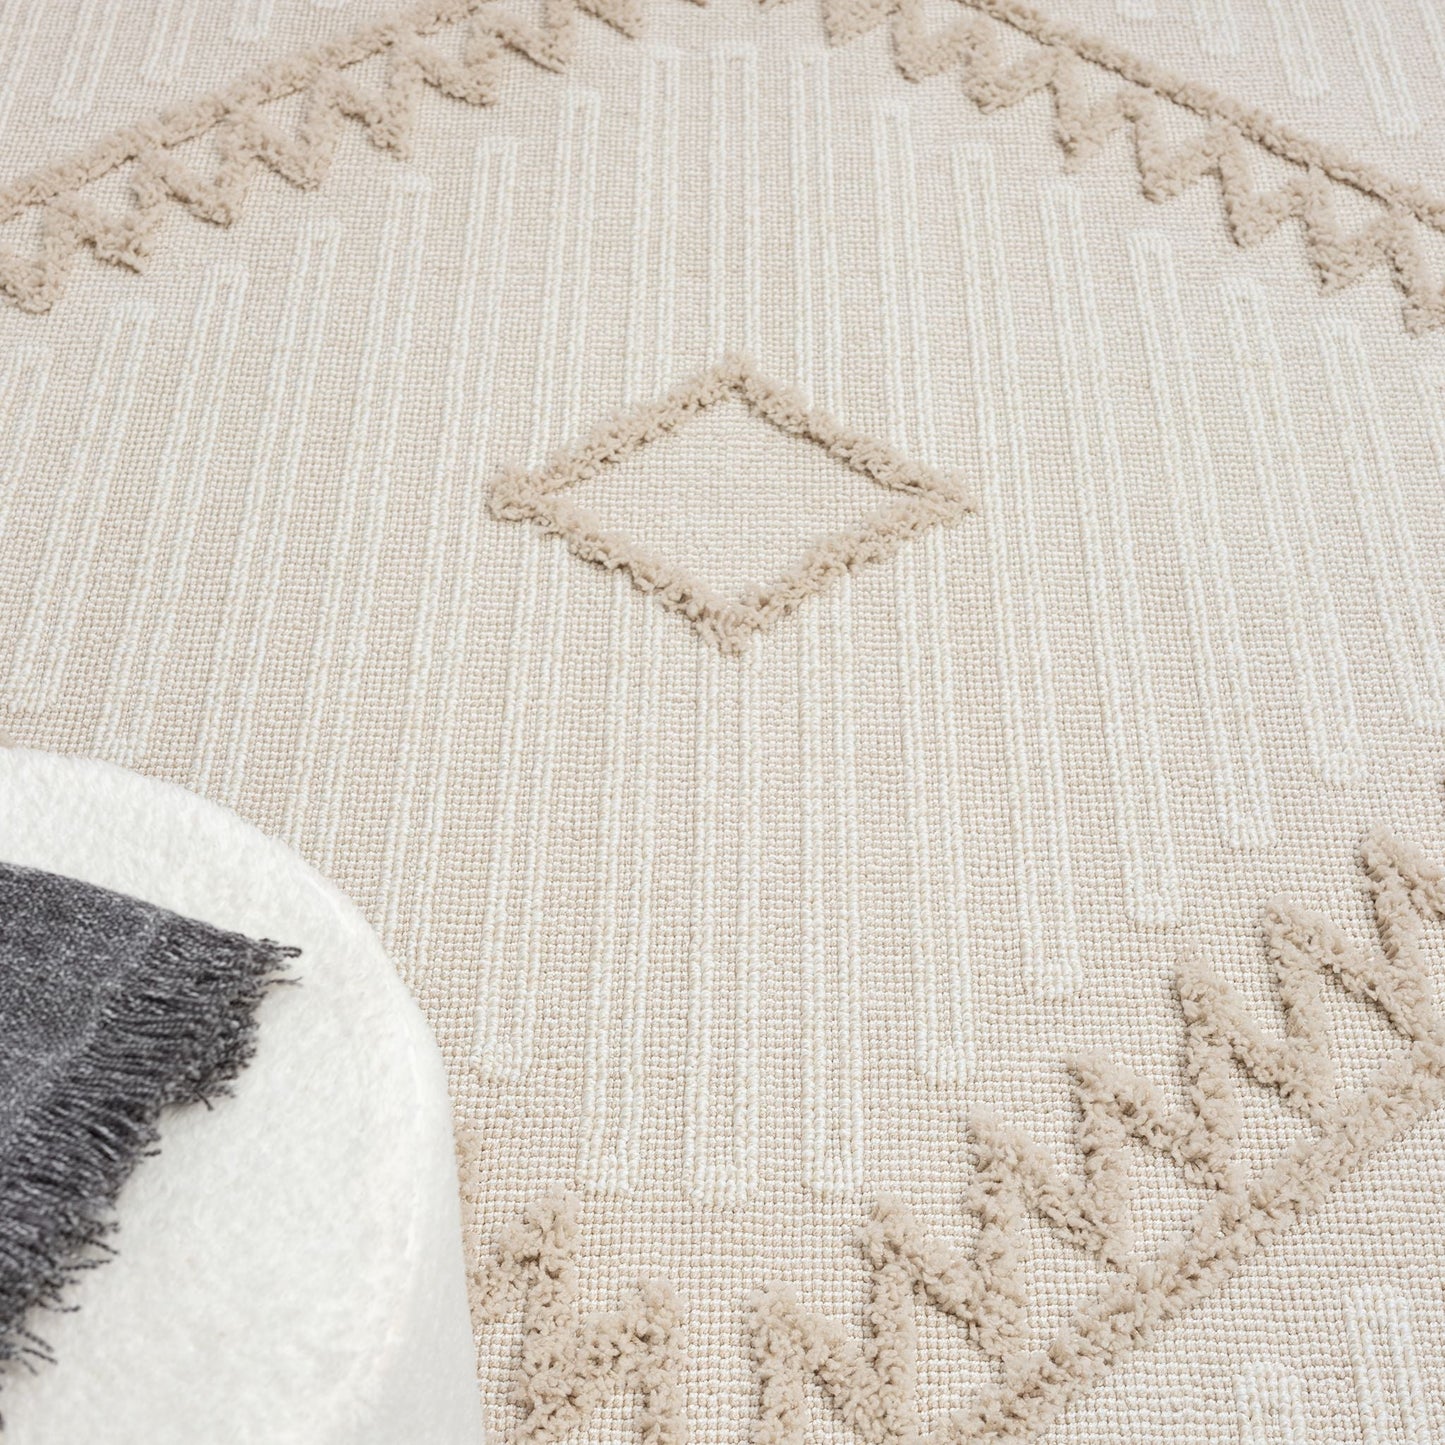 Cottage 545 in Taupe Rug